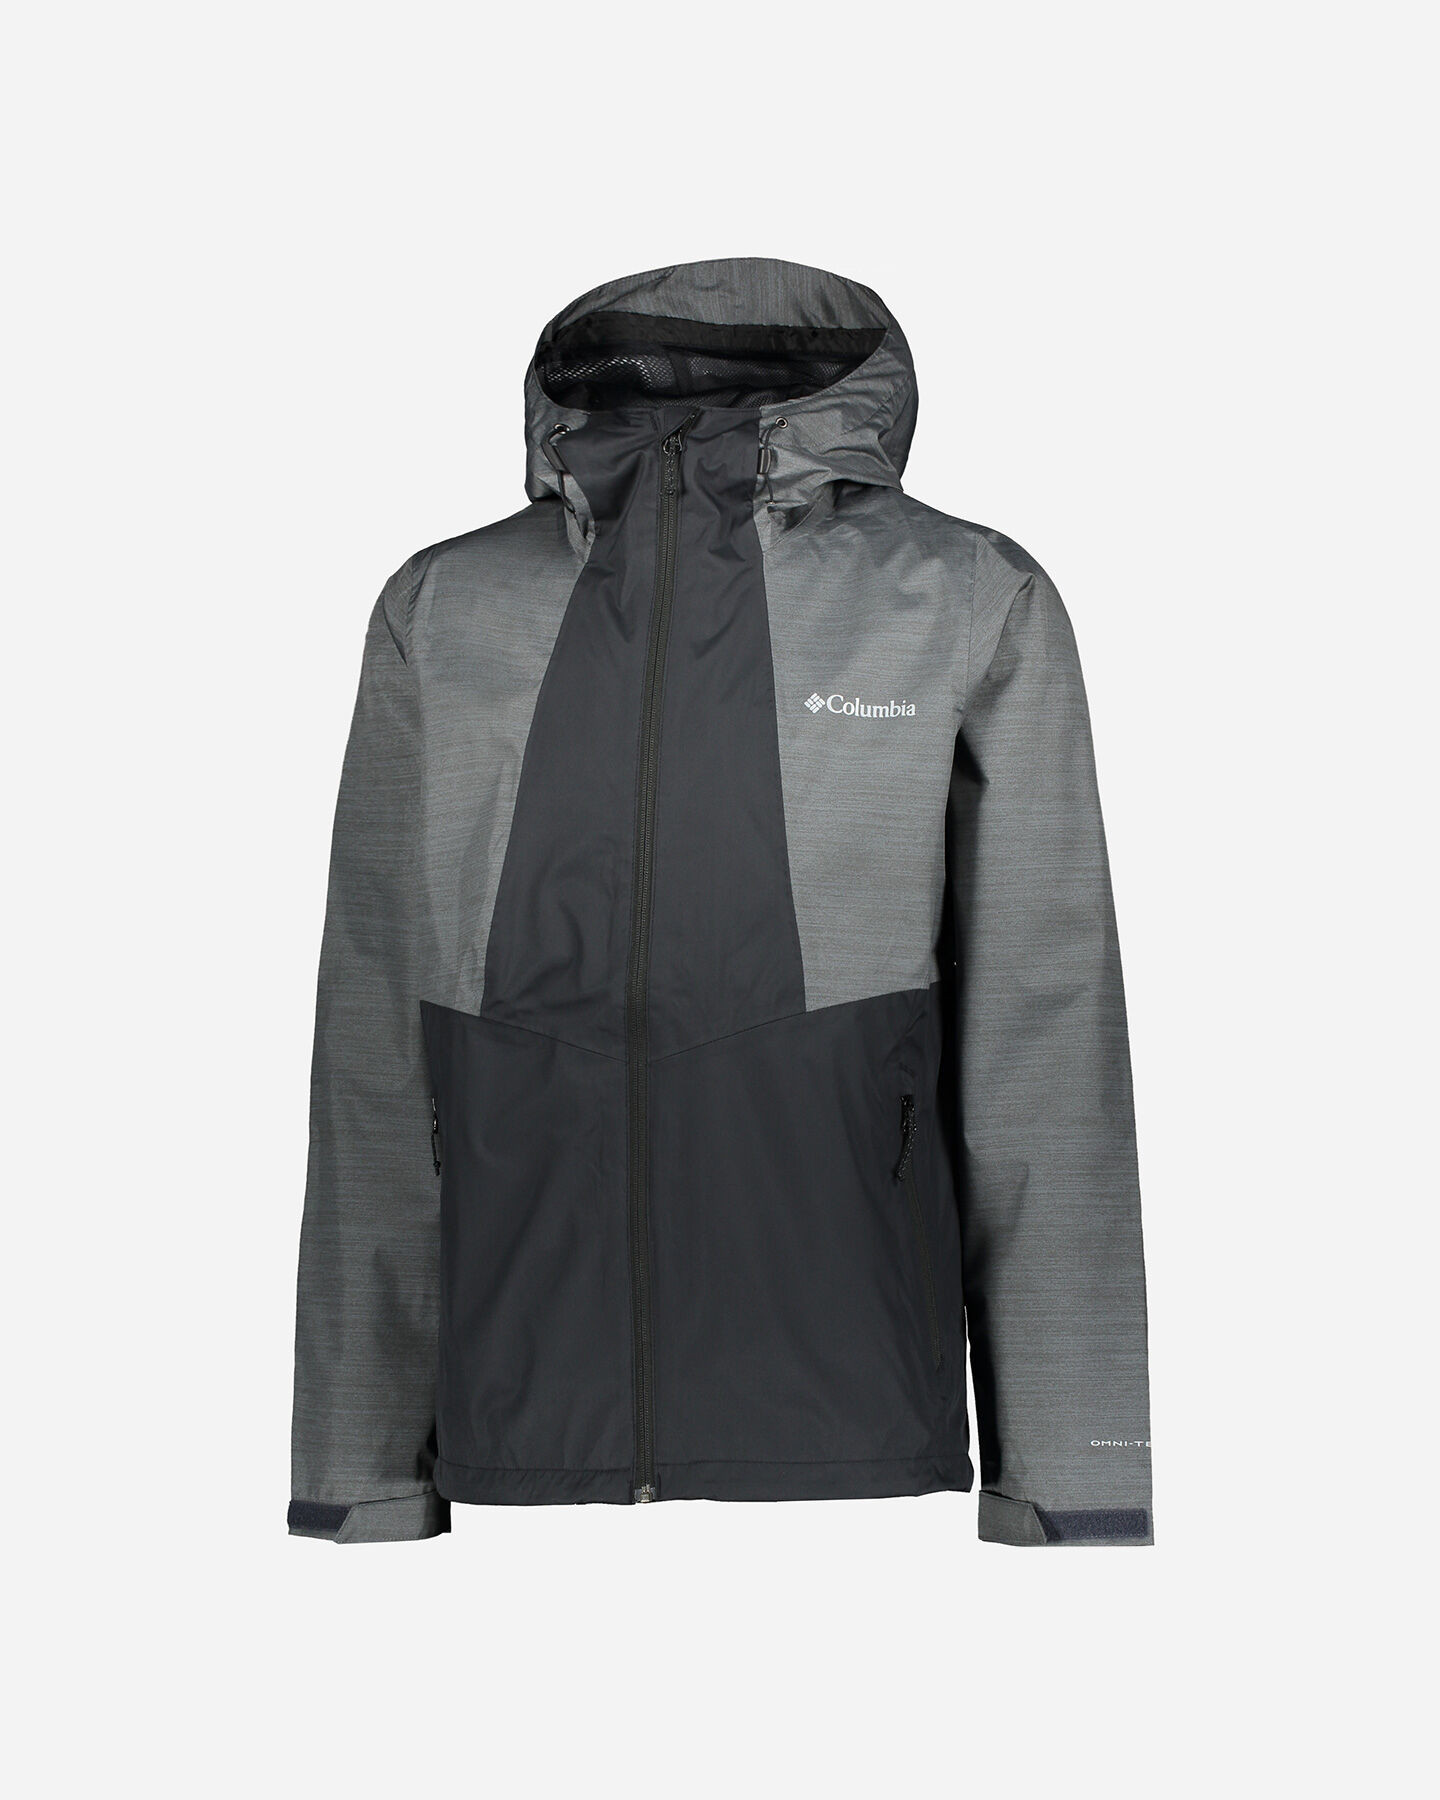  Giacca outdoor COLUMBIA INNER LIMITS II M S5175480|010|S scatto 0